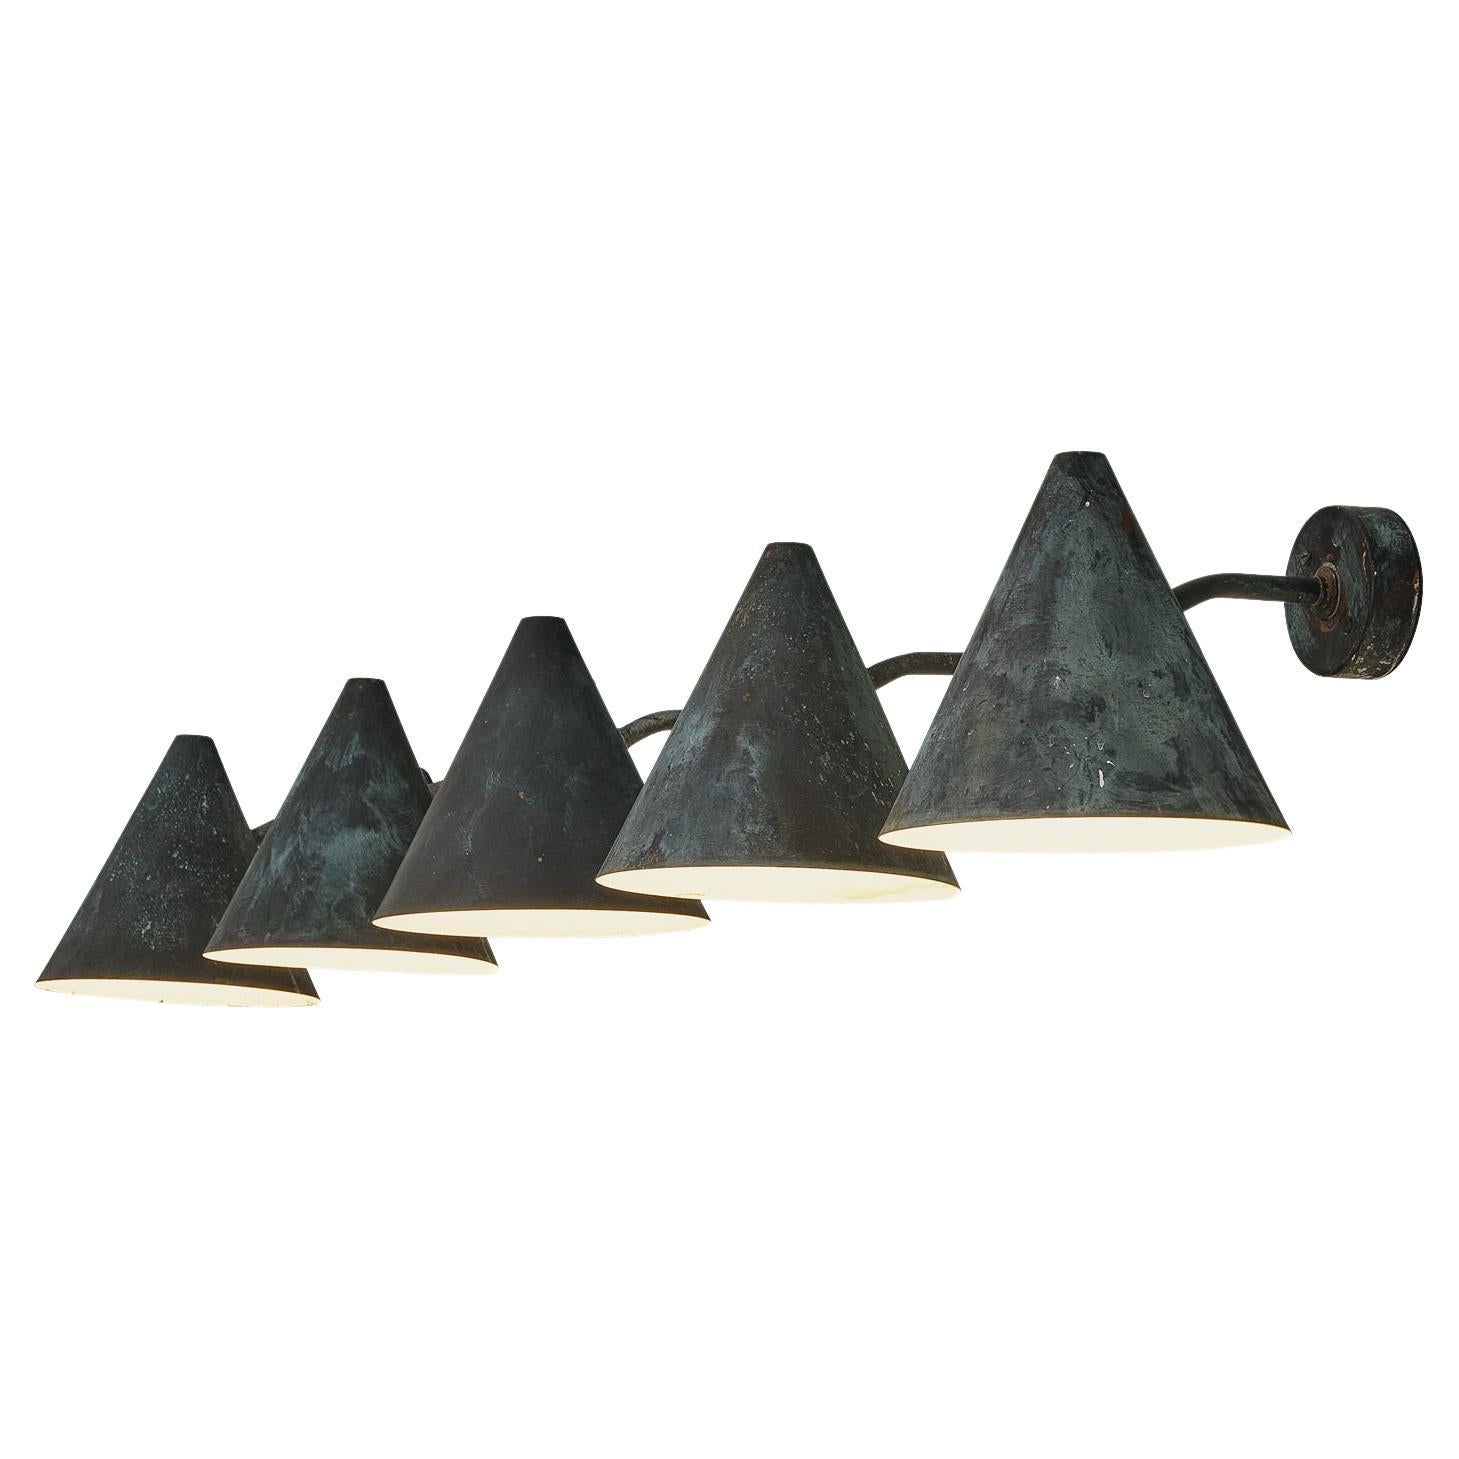  Hans-Agne Jakobsson 'Tratten' Wall Lights in Patinated Copper  For Sale